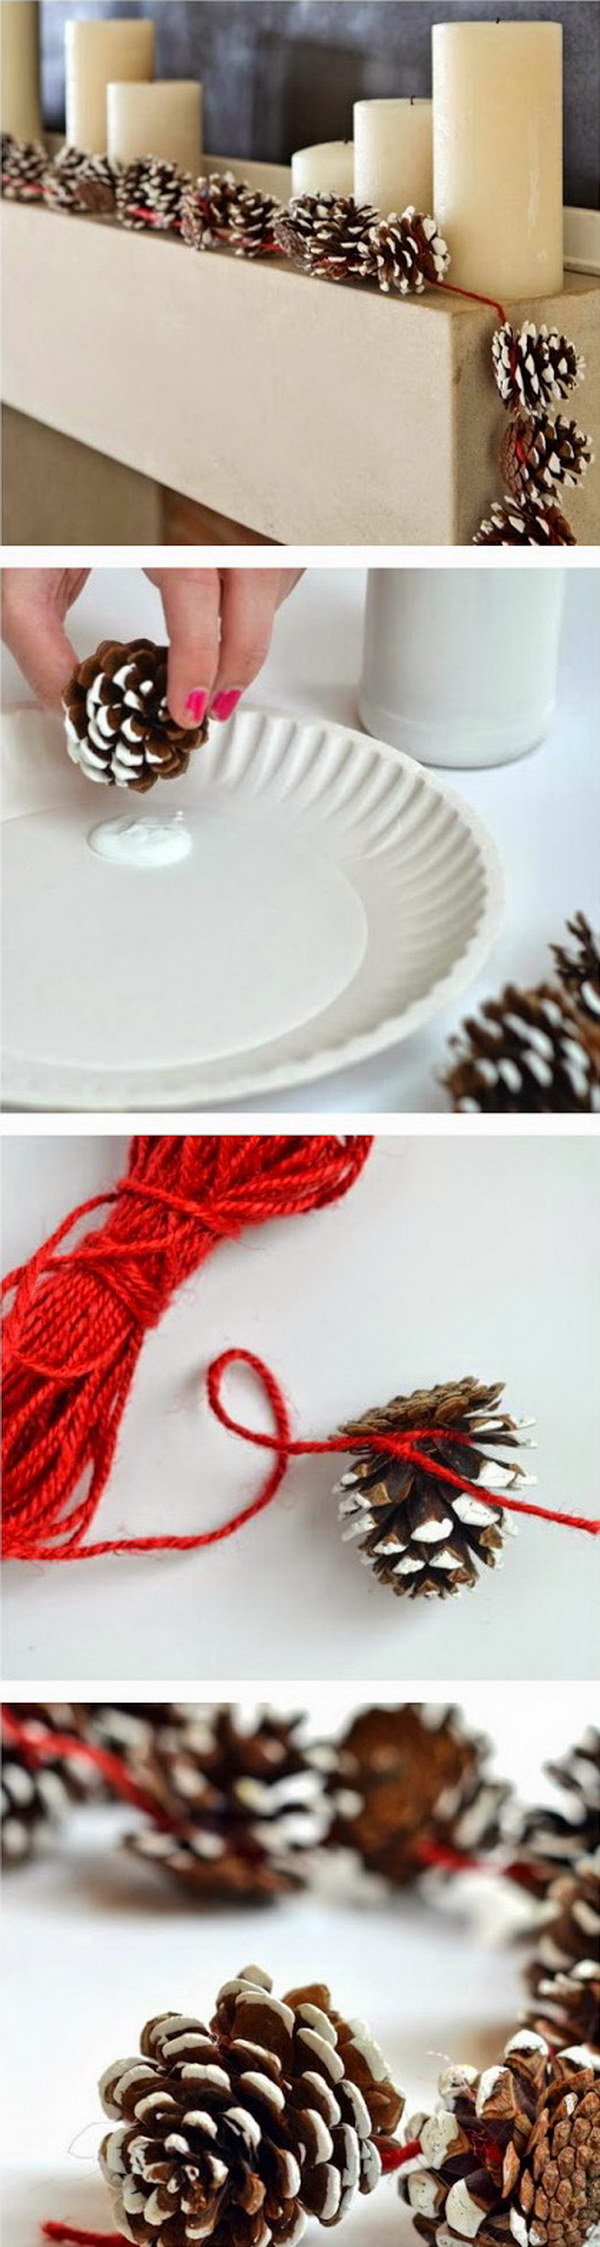 Fir cone garlands for Christmas decoration. Love his rustic look for home decorating. Super easy handicrafts that your children can participate in.